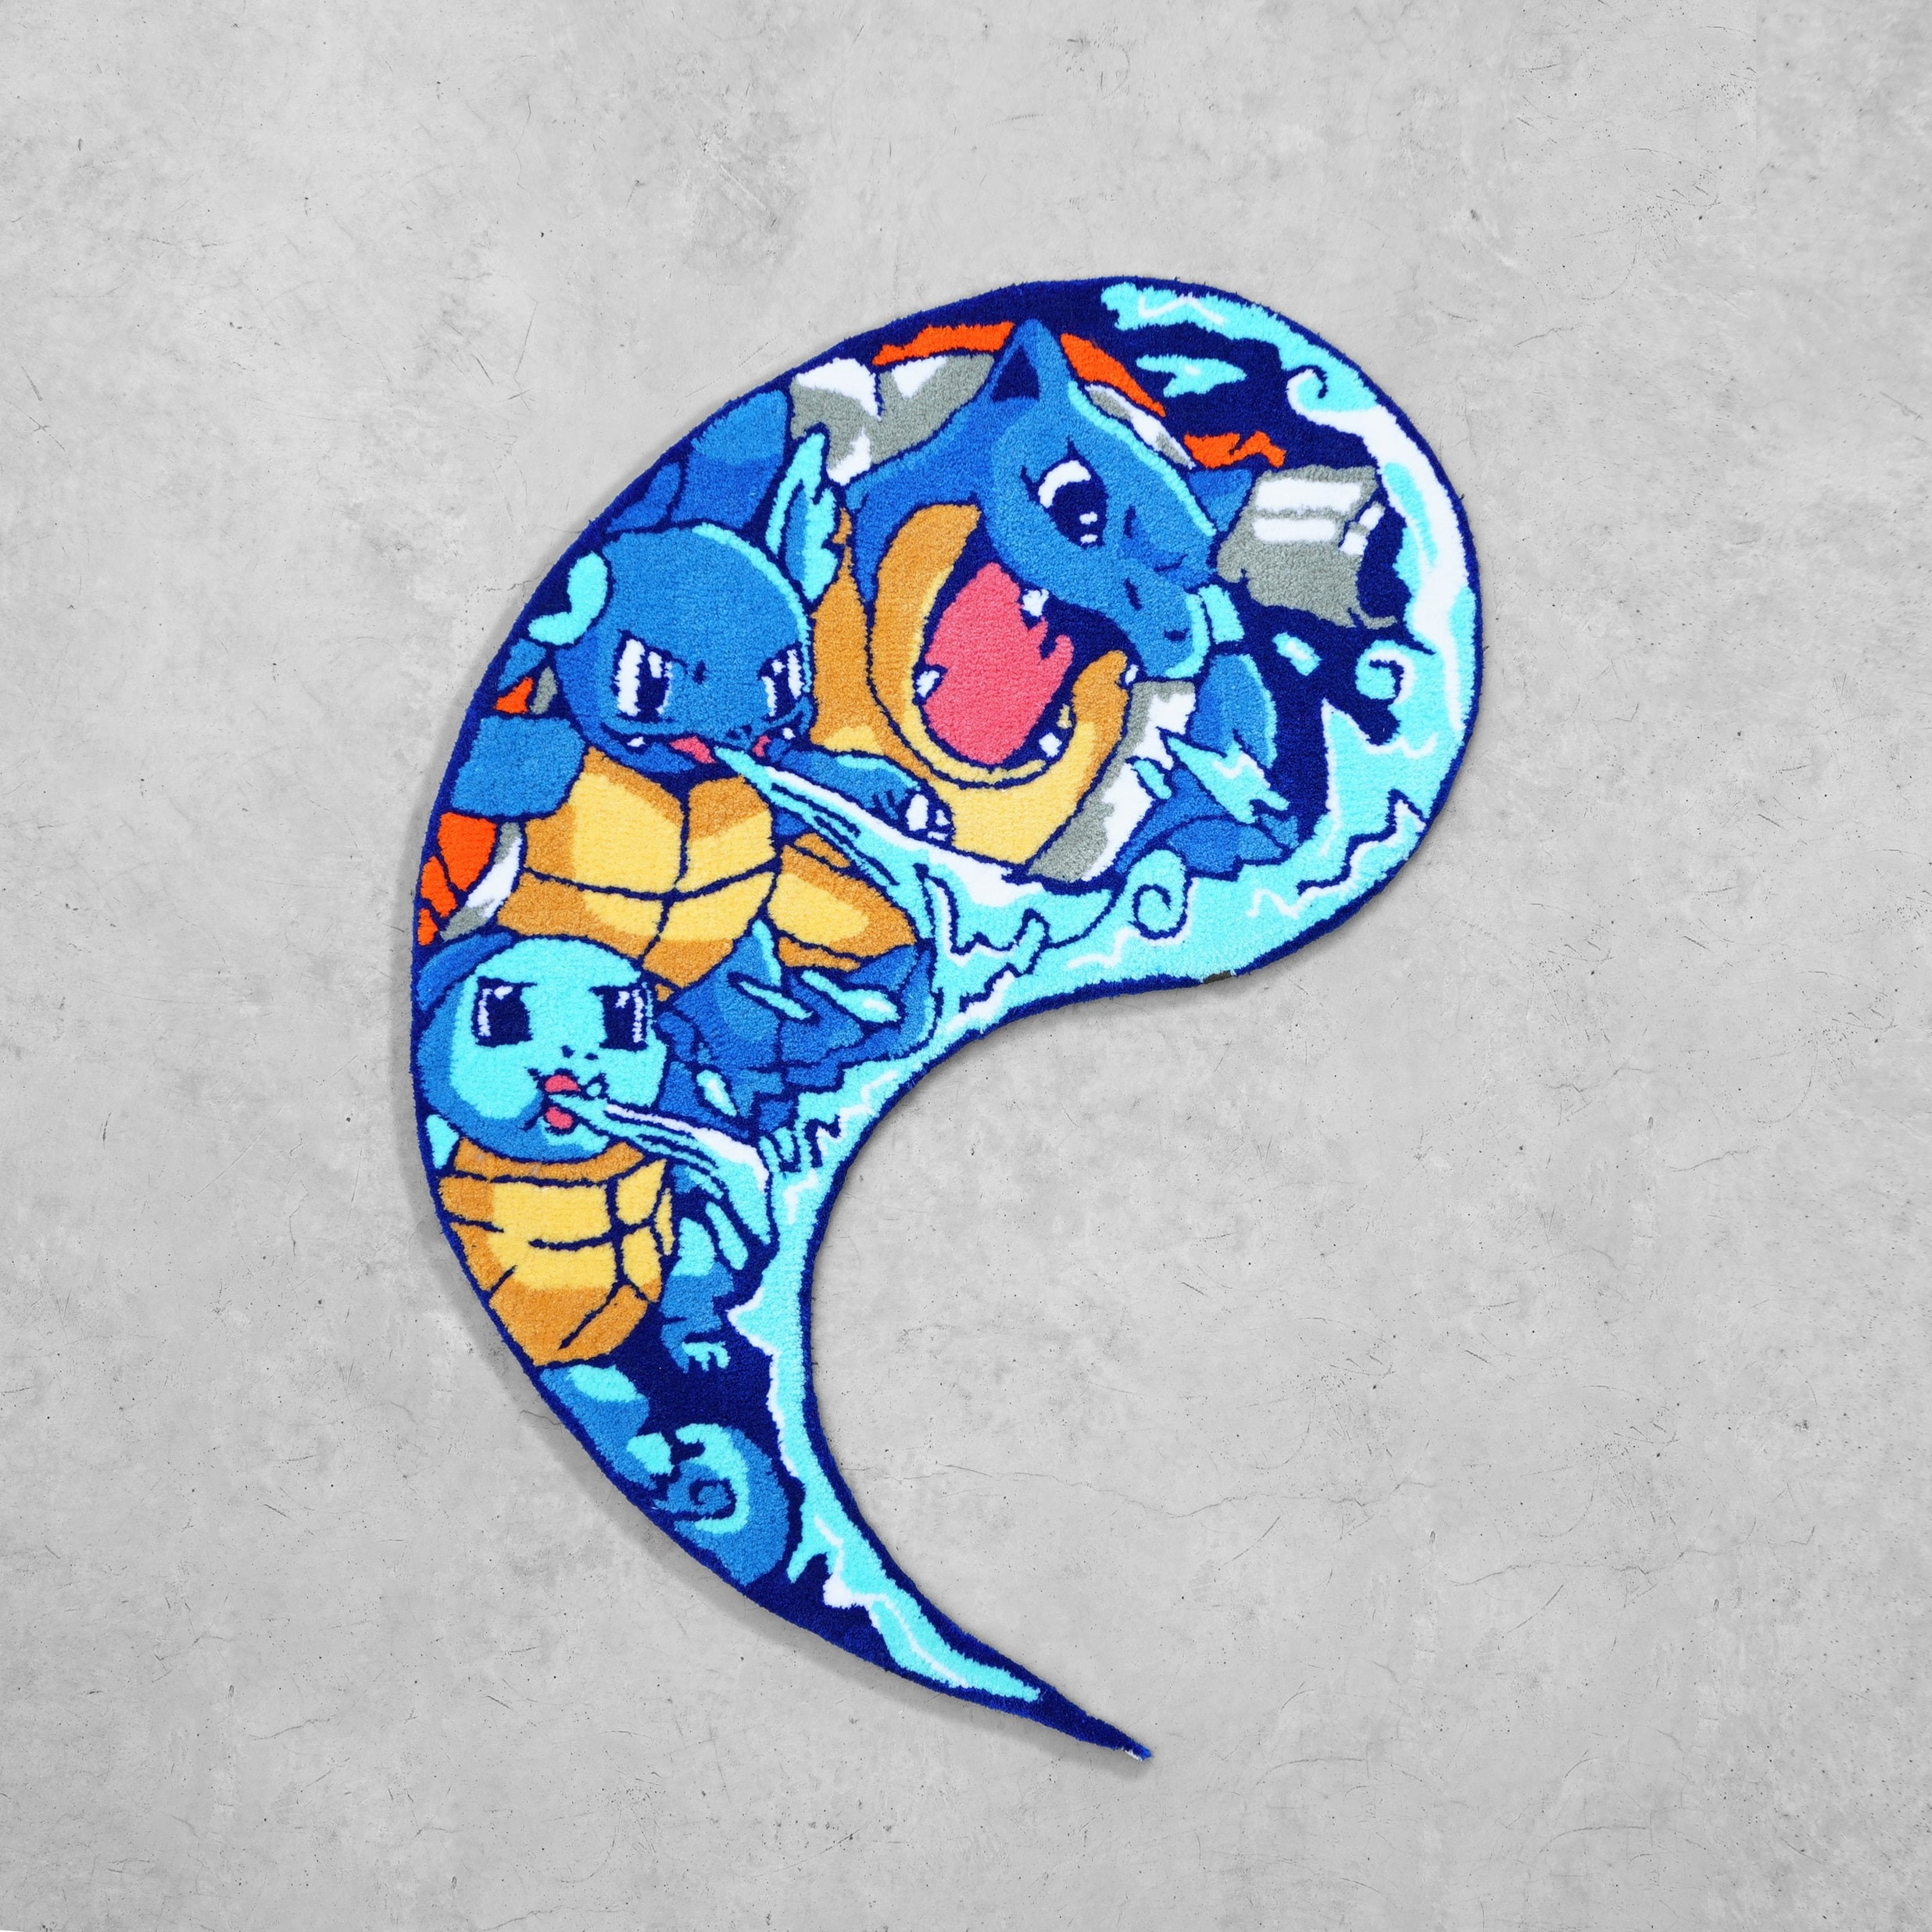 YINYANG BLASTOISE SPECIAL EDITION